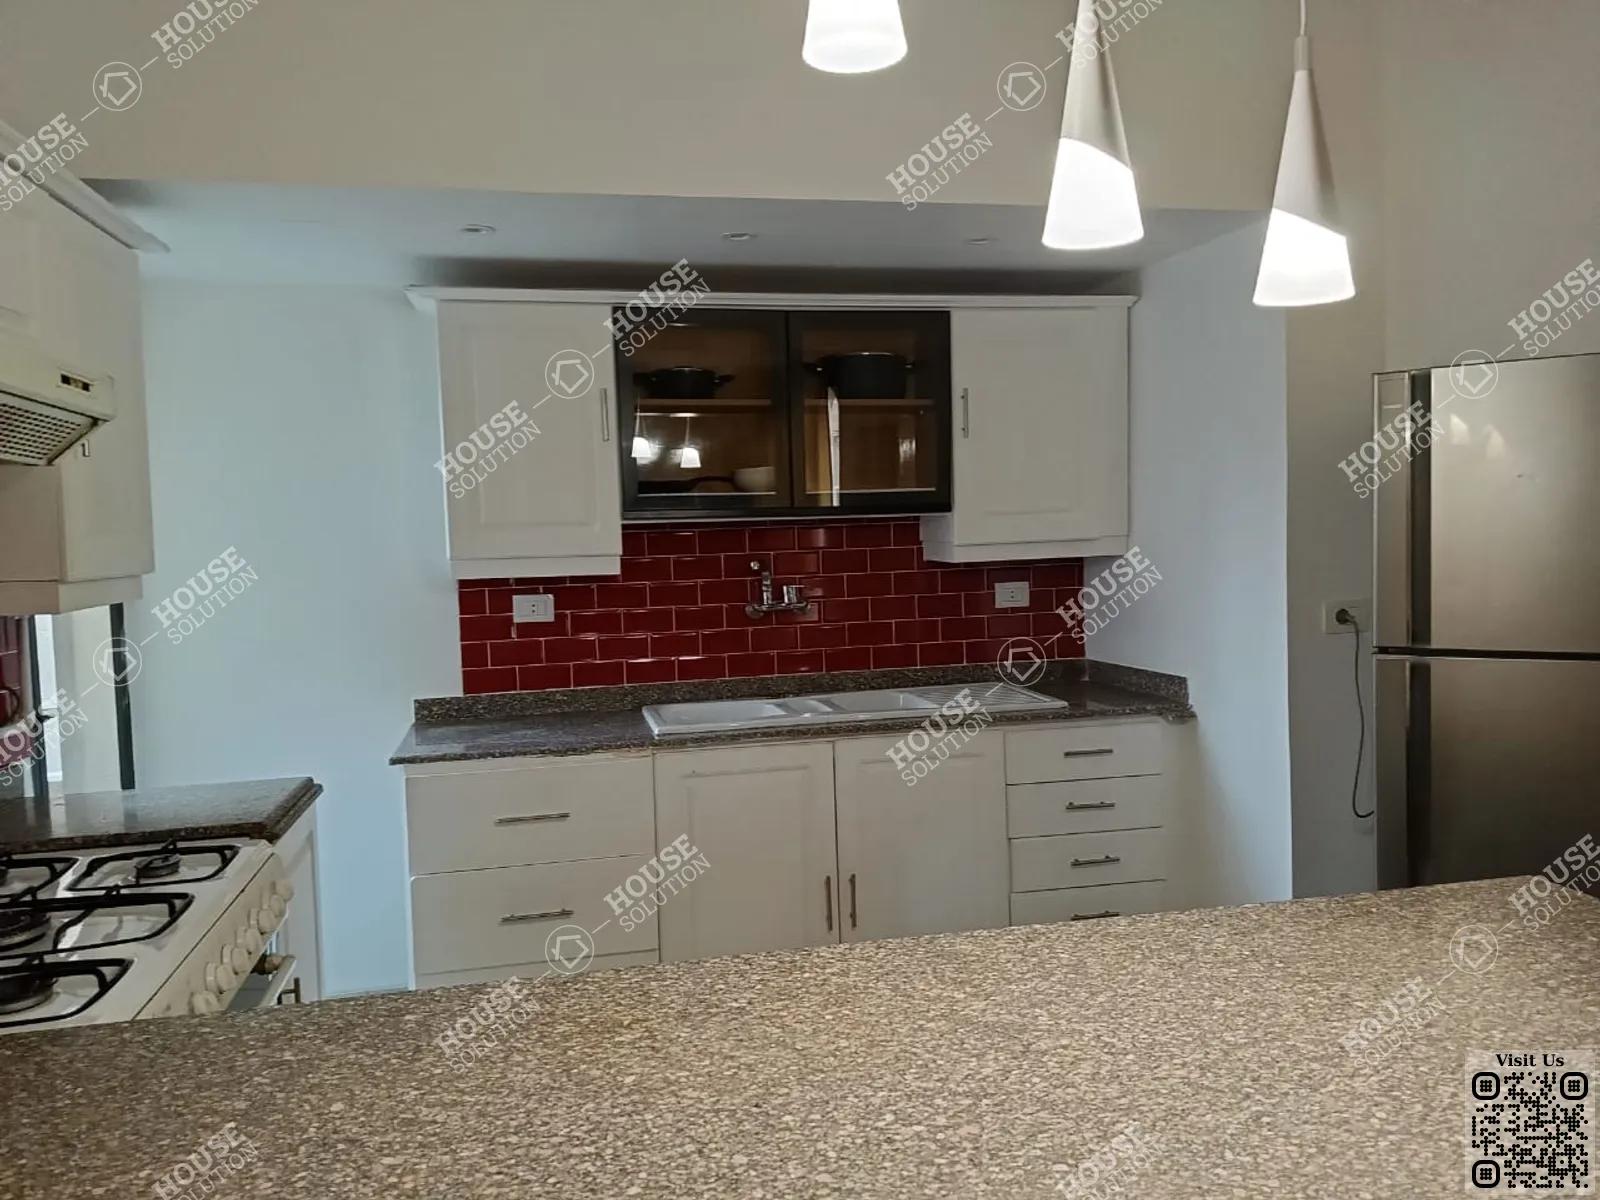 KITCHEN  @ Apartments For Rent In Maadi Maadi Degla Area: 185 m² consists of 3 Bedrooms 2 Bathrooms Modern furnished 5 stars #5861-2